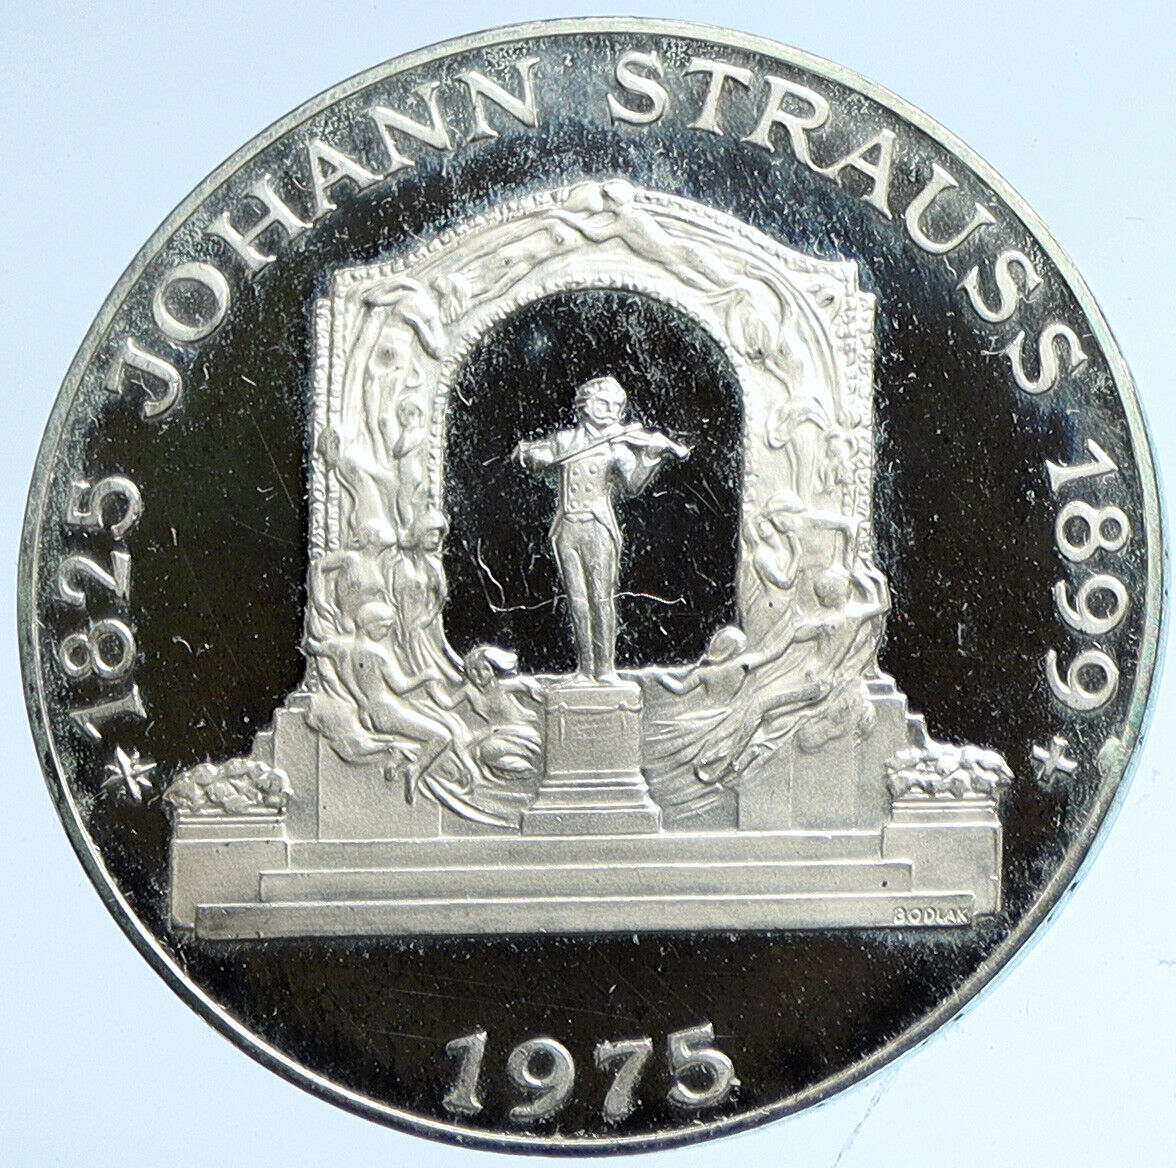 1975 AUSTRIA Johann Strauss Composer OLD Proof Silver 100 Shilling Coin i113199